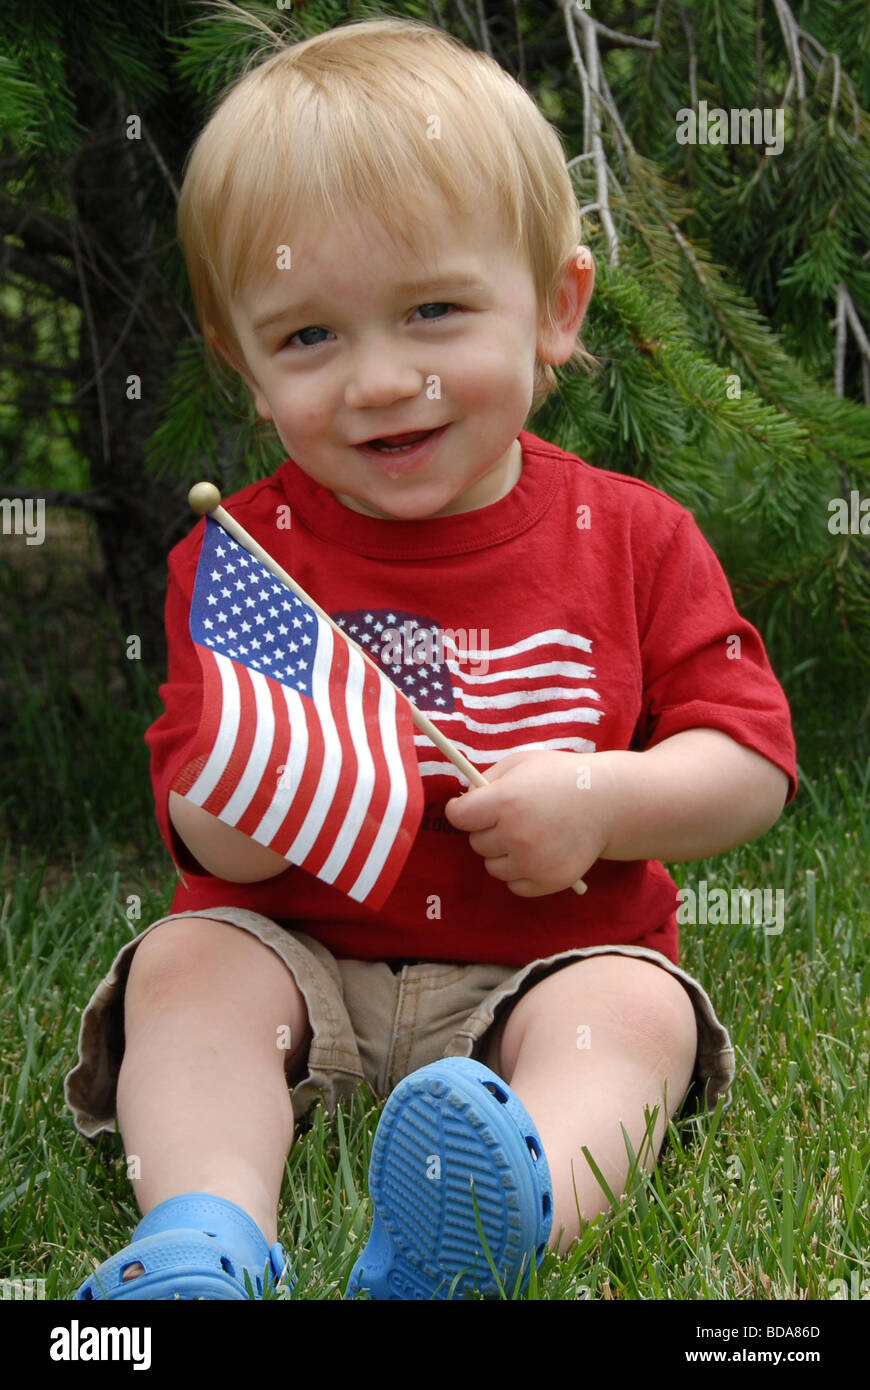 A baby boy sits in the grass waving an American flag on the Fourth of July wearing red white and blue clothes. Stock Photo